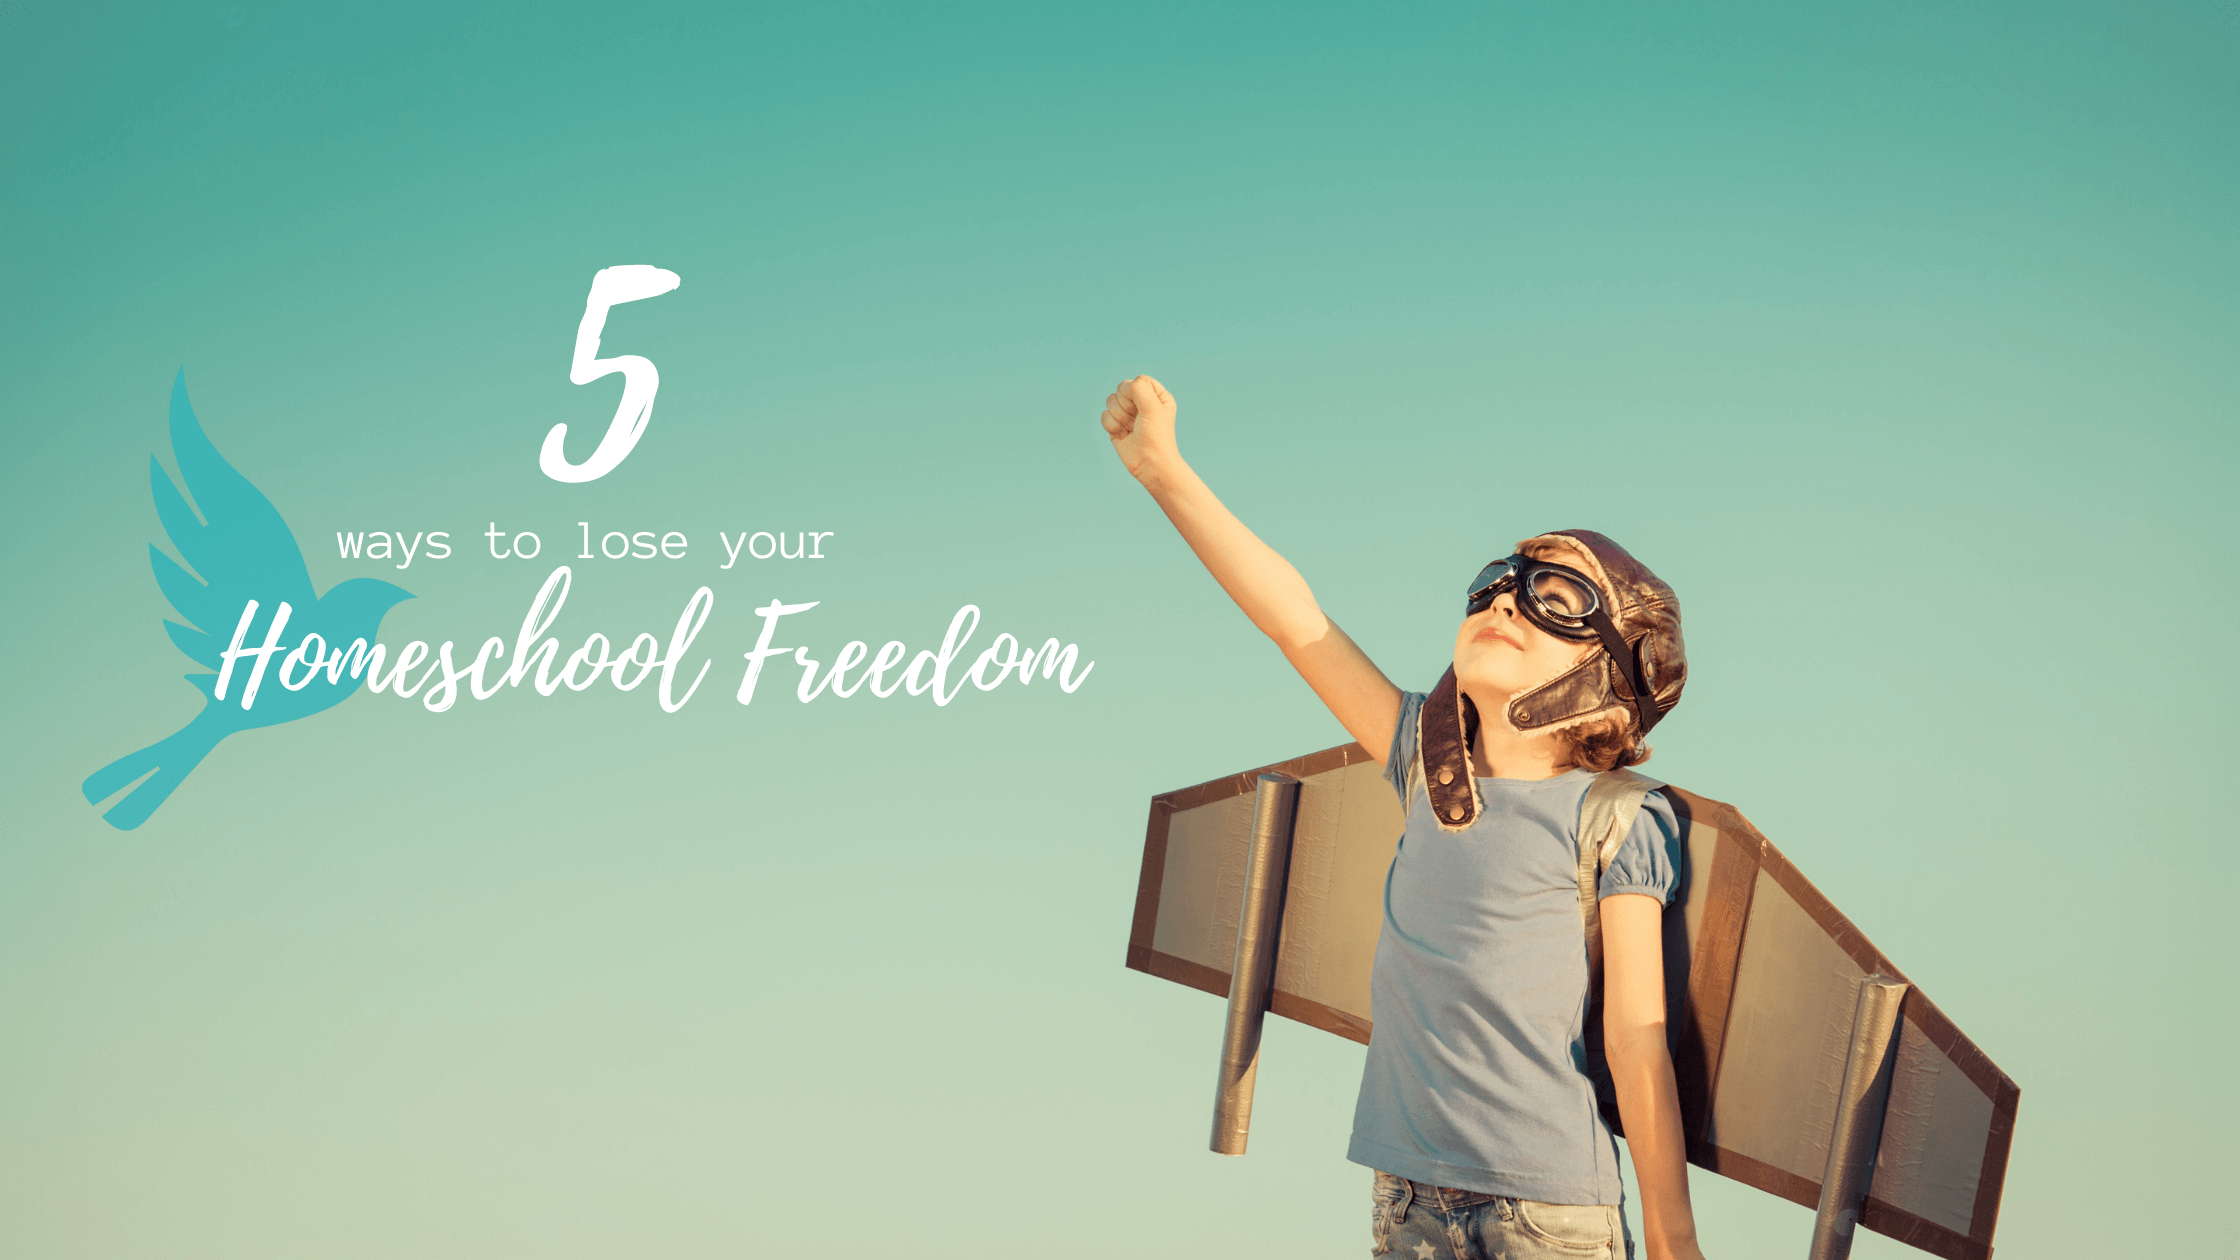 5 Ways to Lose Your Homeschool Freedom